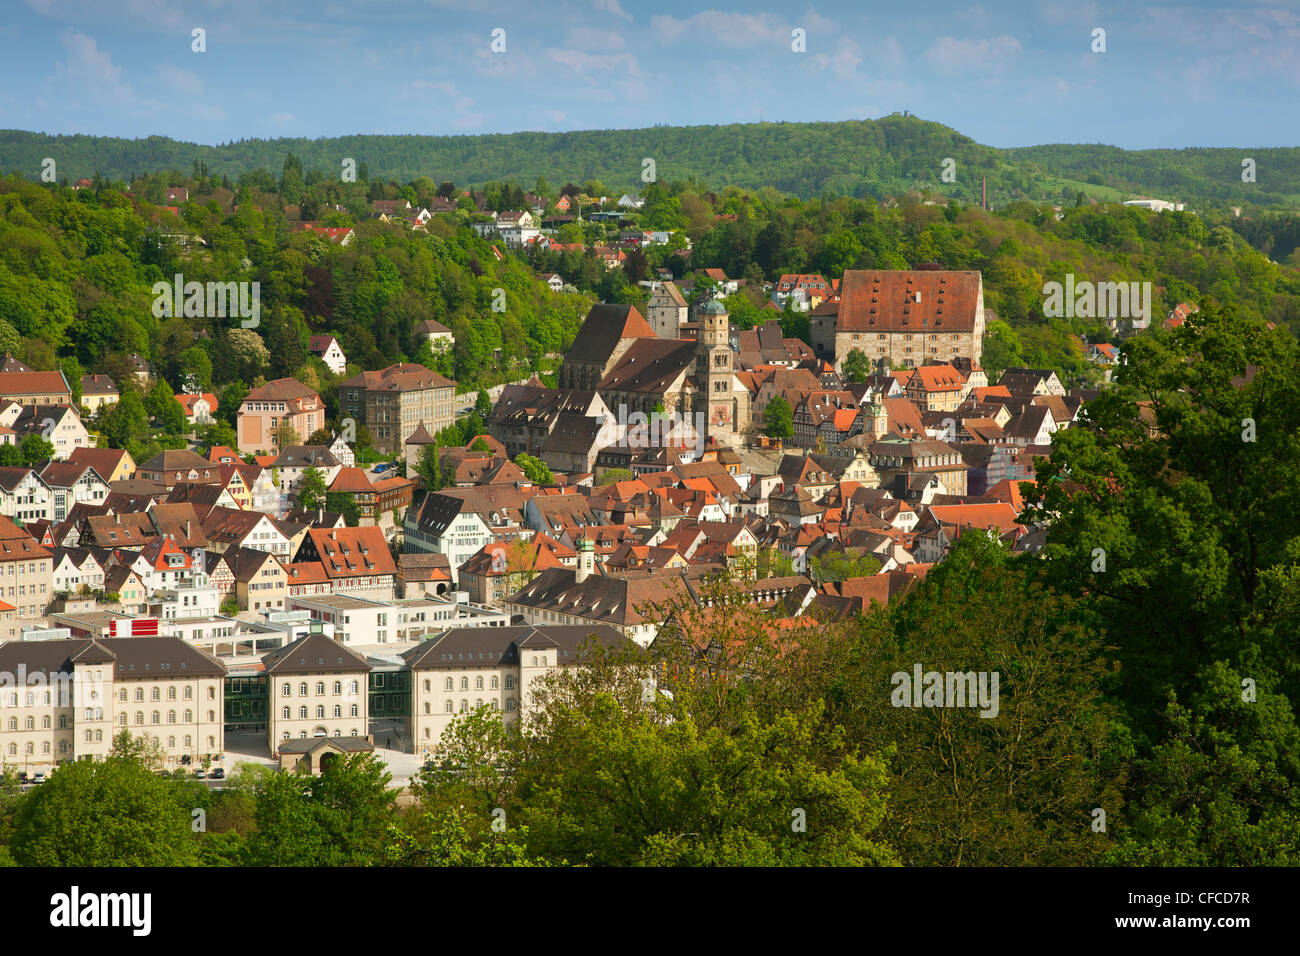 View of the city of Schwaebisch Hall in the sunlight, Hohenlohe region, Baden-Wuerttemberg, Germany, Europe Stock Photo